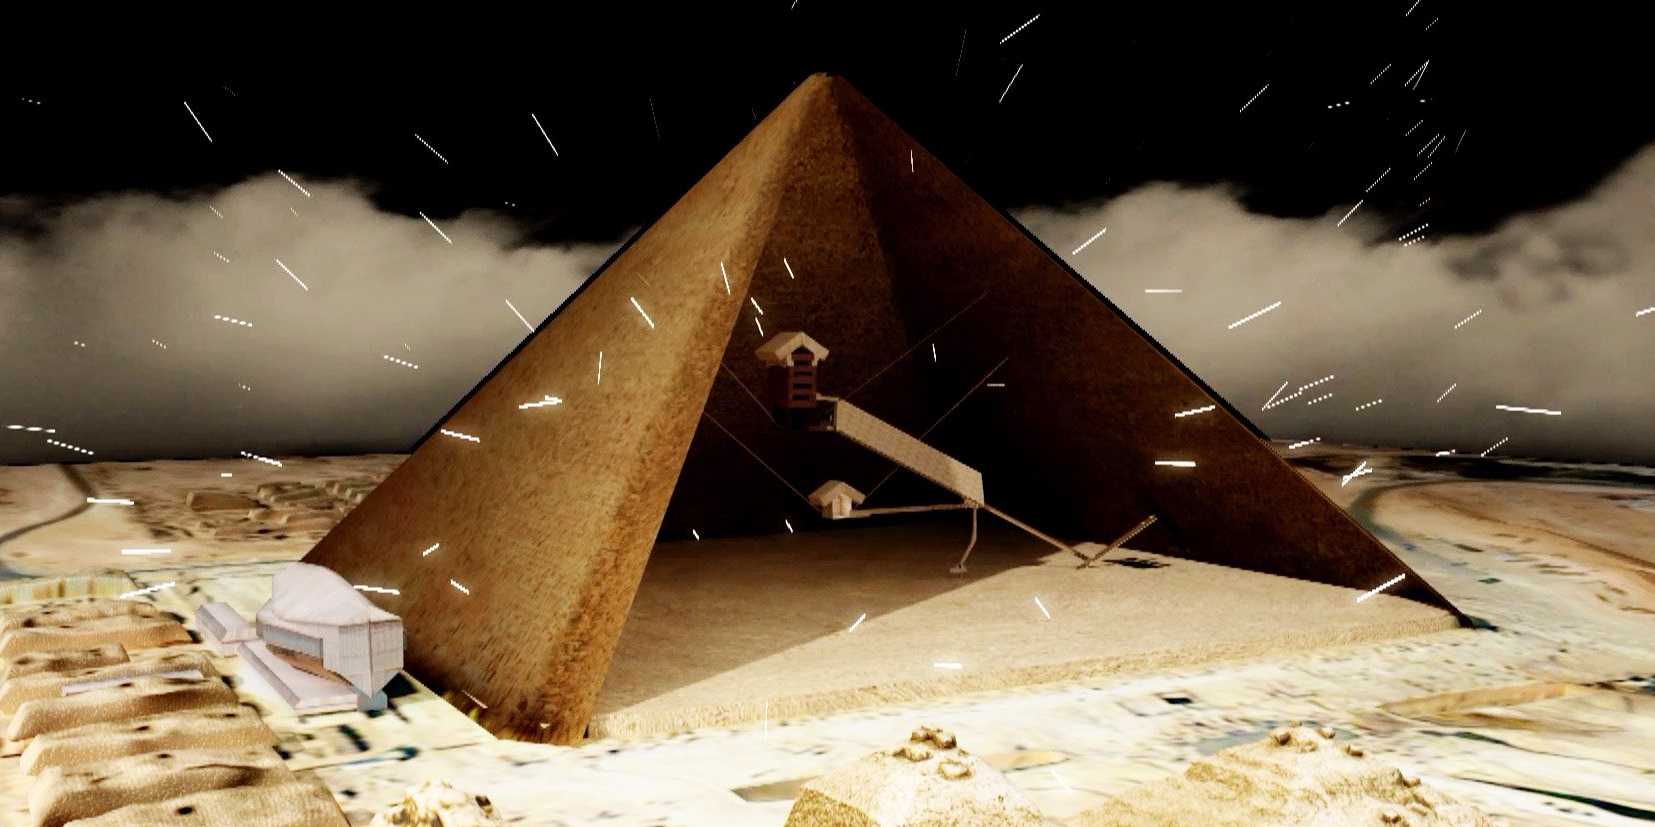 scientists-hope-to-find-hidden-tombs-by-scanning-the-egyptian-pyramids-with-cosmic-rays.jpg